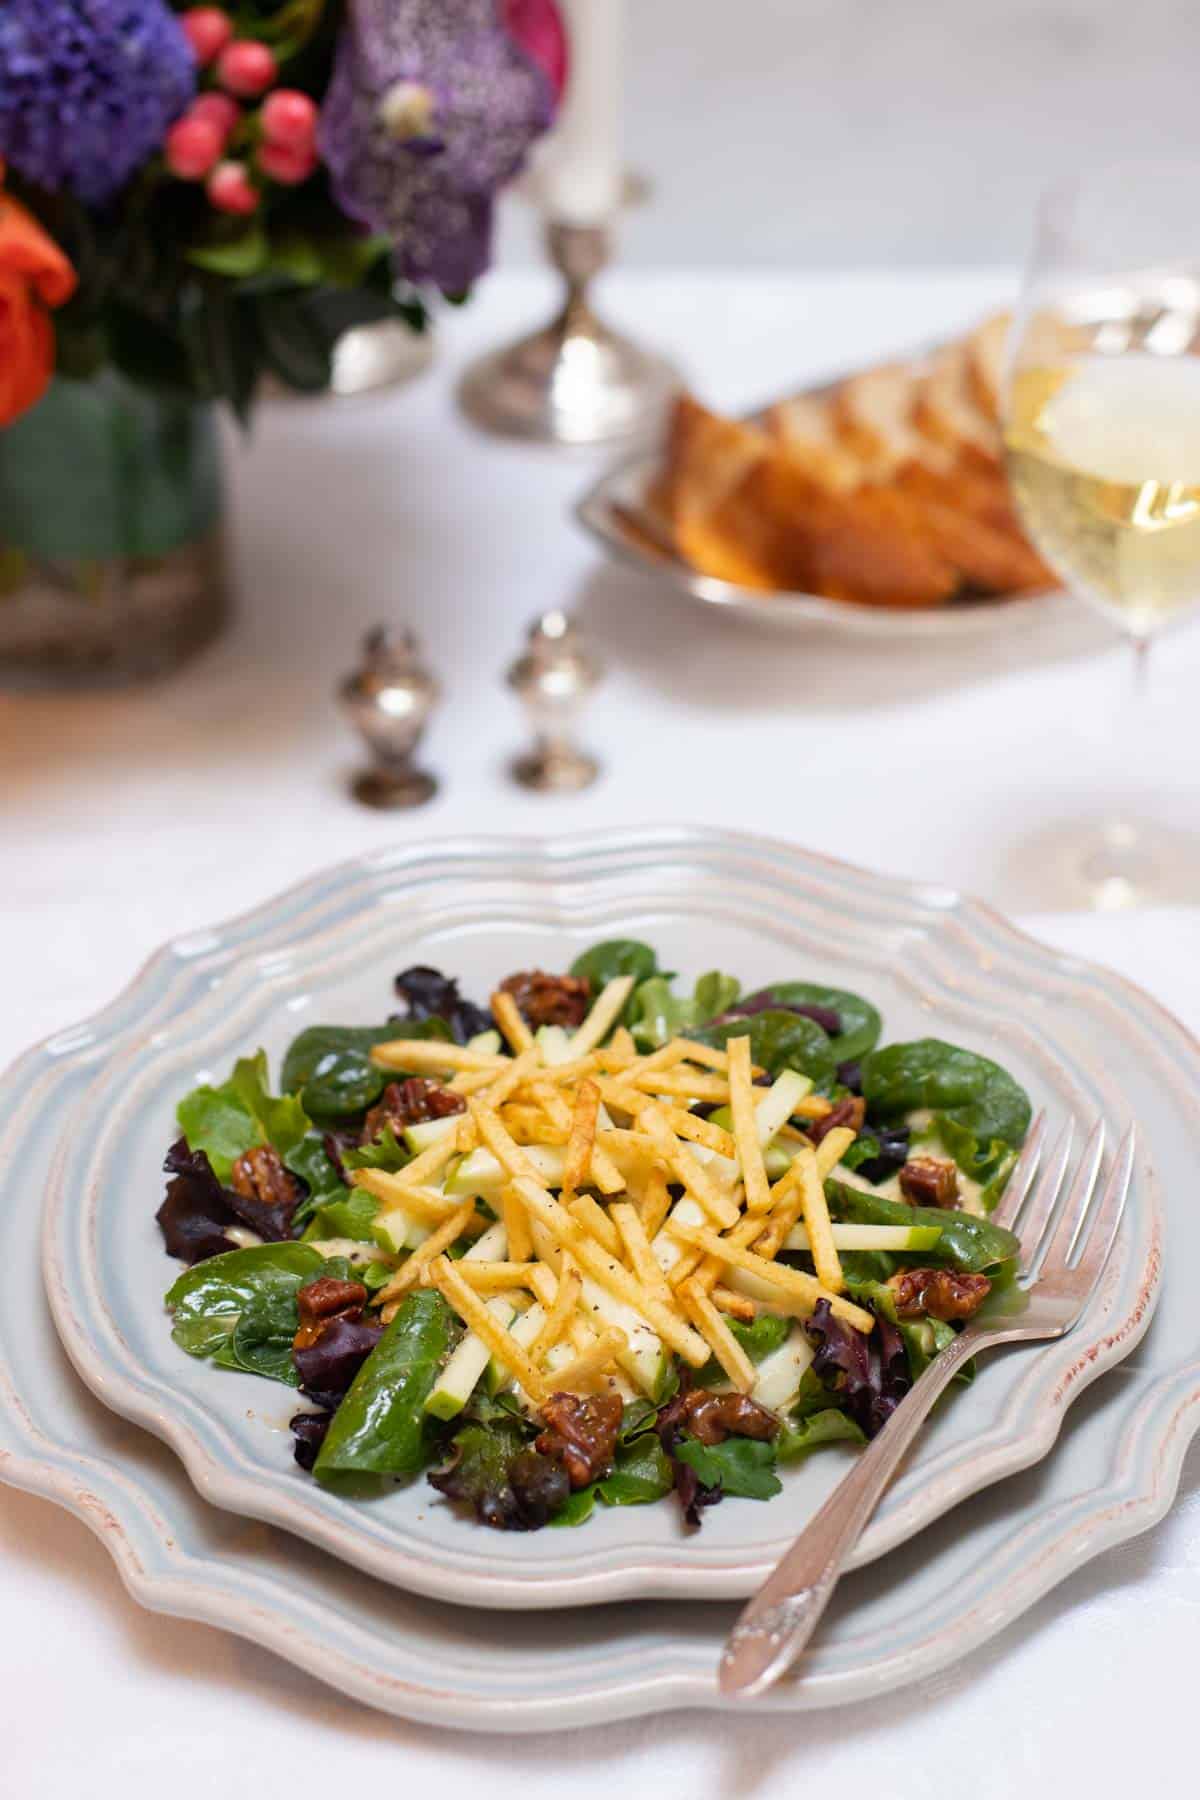 individual salad plate holding mixed greens sald with apples and pecans, on top of a dinner plate with bread and flowers in the background